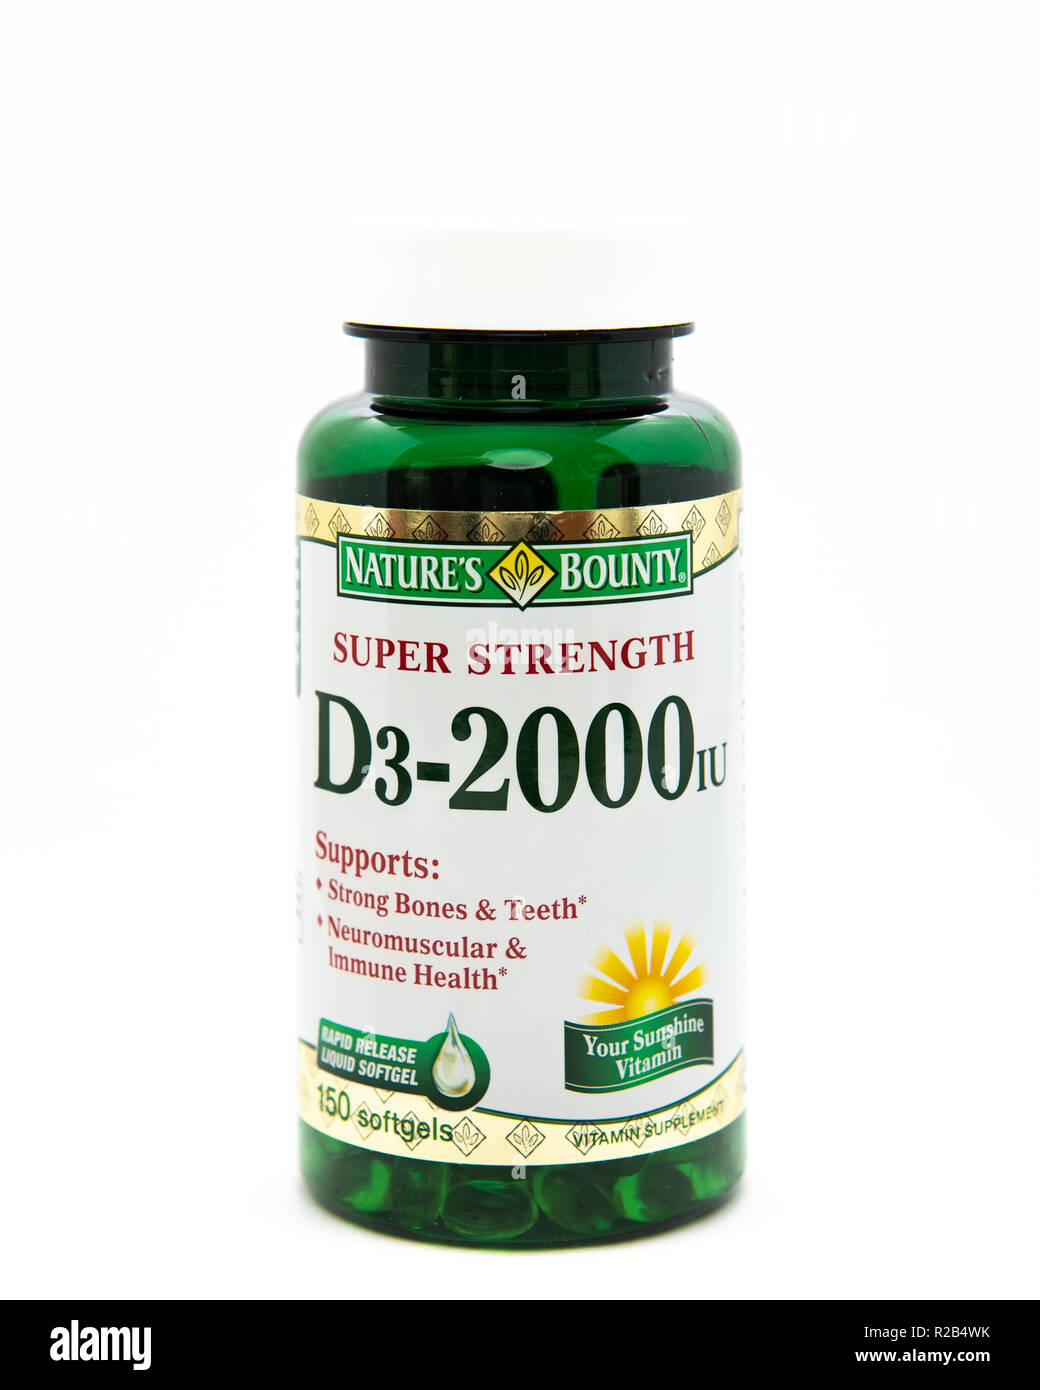 A green plastic bottle of super strength vitamin D3 softgels for strong bones & teeth and neuromuscular & immune system health supplements. Stock Photo